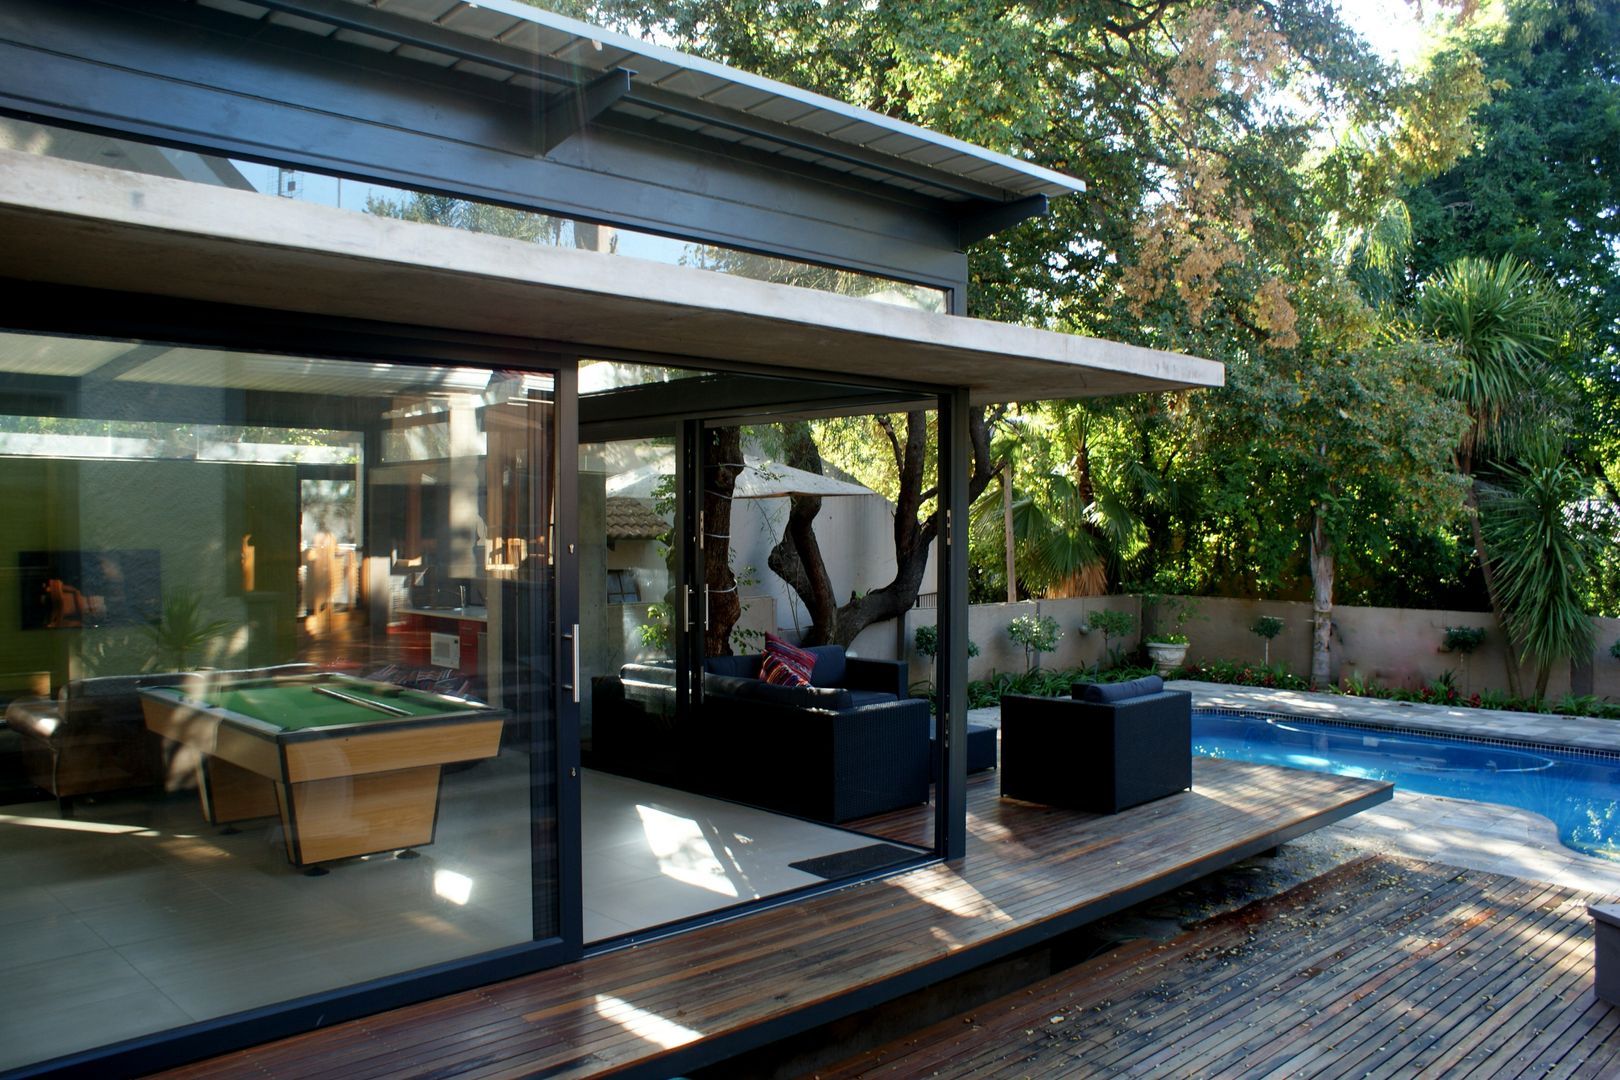 Playroom / poolroom addition to existing house, Bloemfontein, Free State Smit Architects Pool